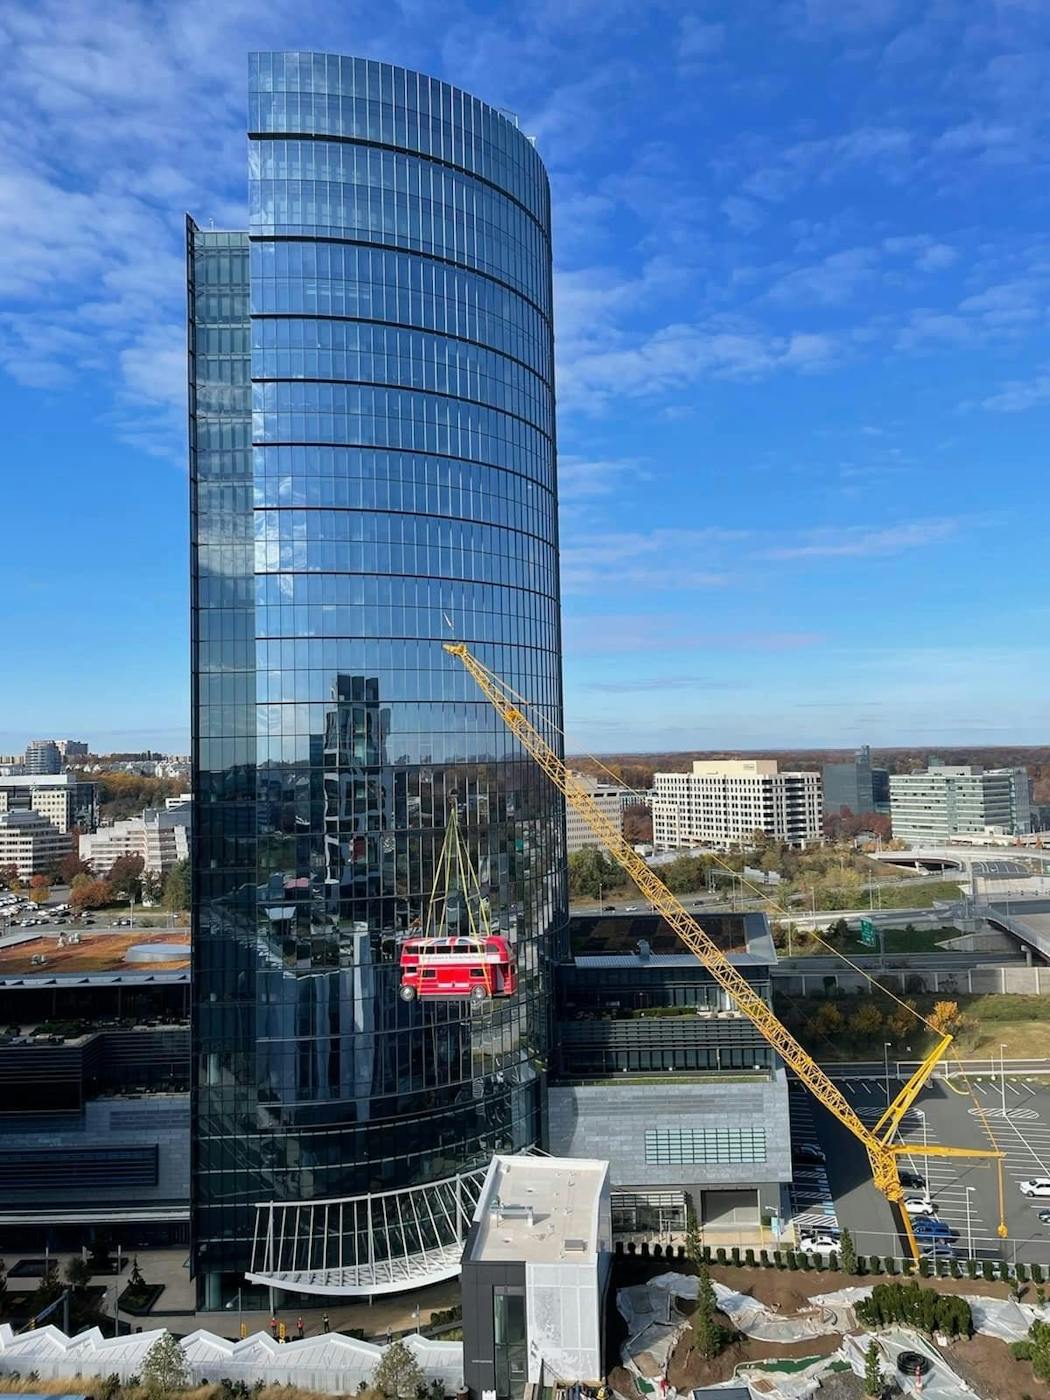 Chameleon Concessions refurbished a London double-decker bus that was placed on a rooftop park 11 stories high at Capital One Hall in Tysons, Va.